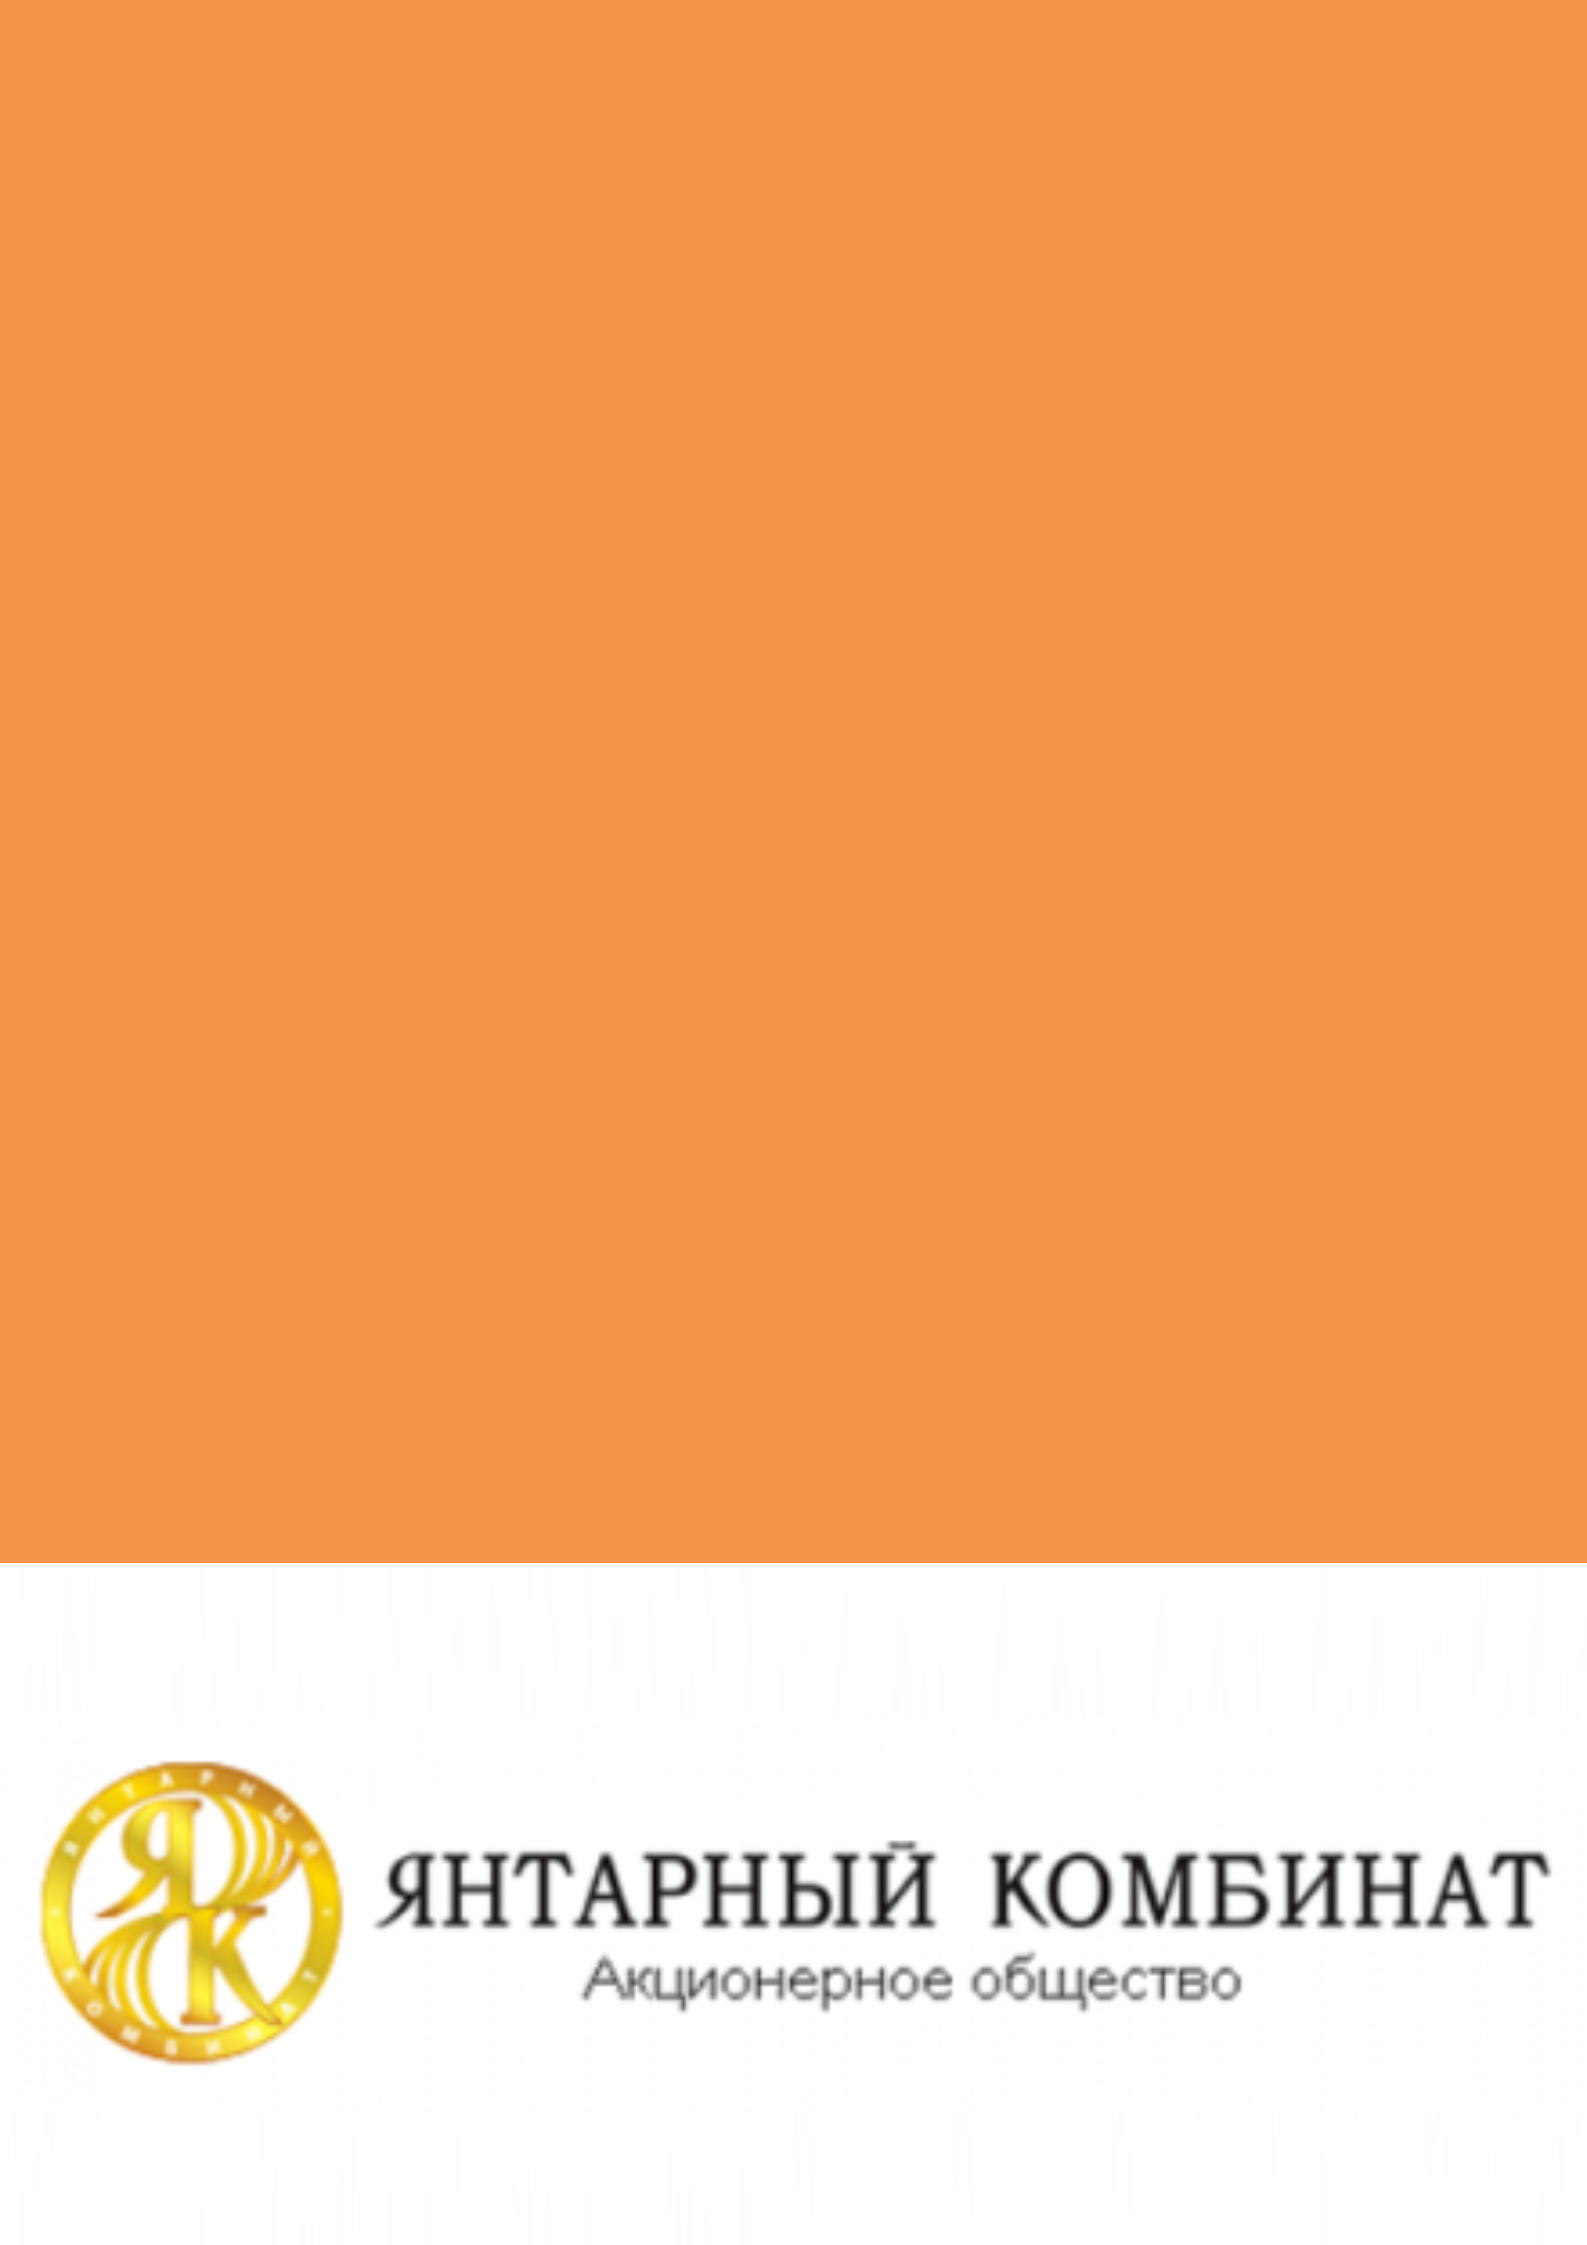 Kaliningrad Amber Plant increased sales of the mineral on the stock exchange by almost 1.7 times in 10 months